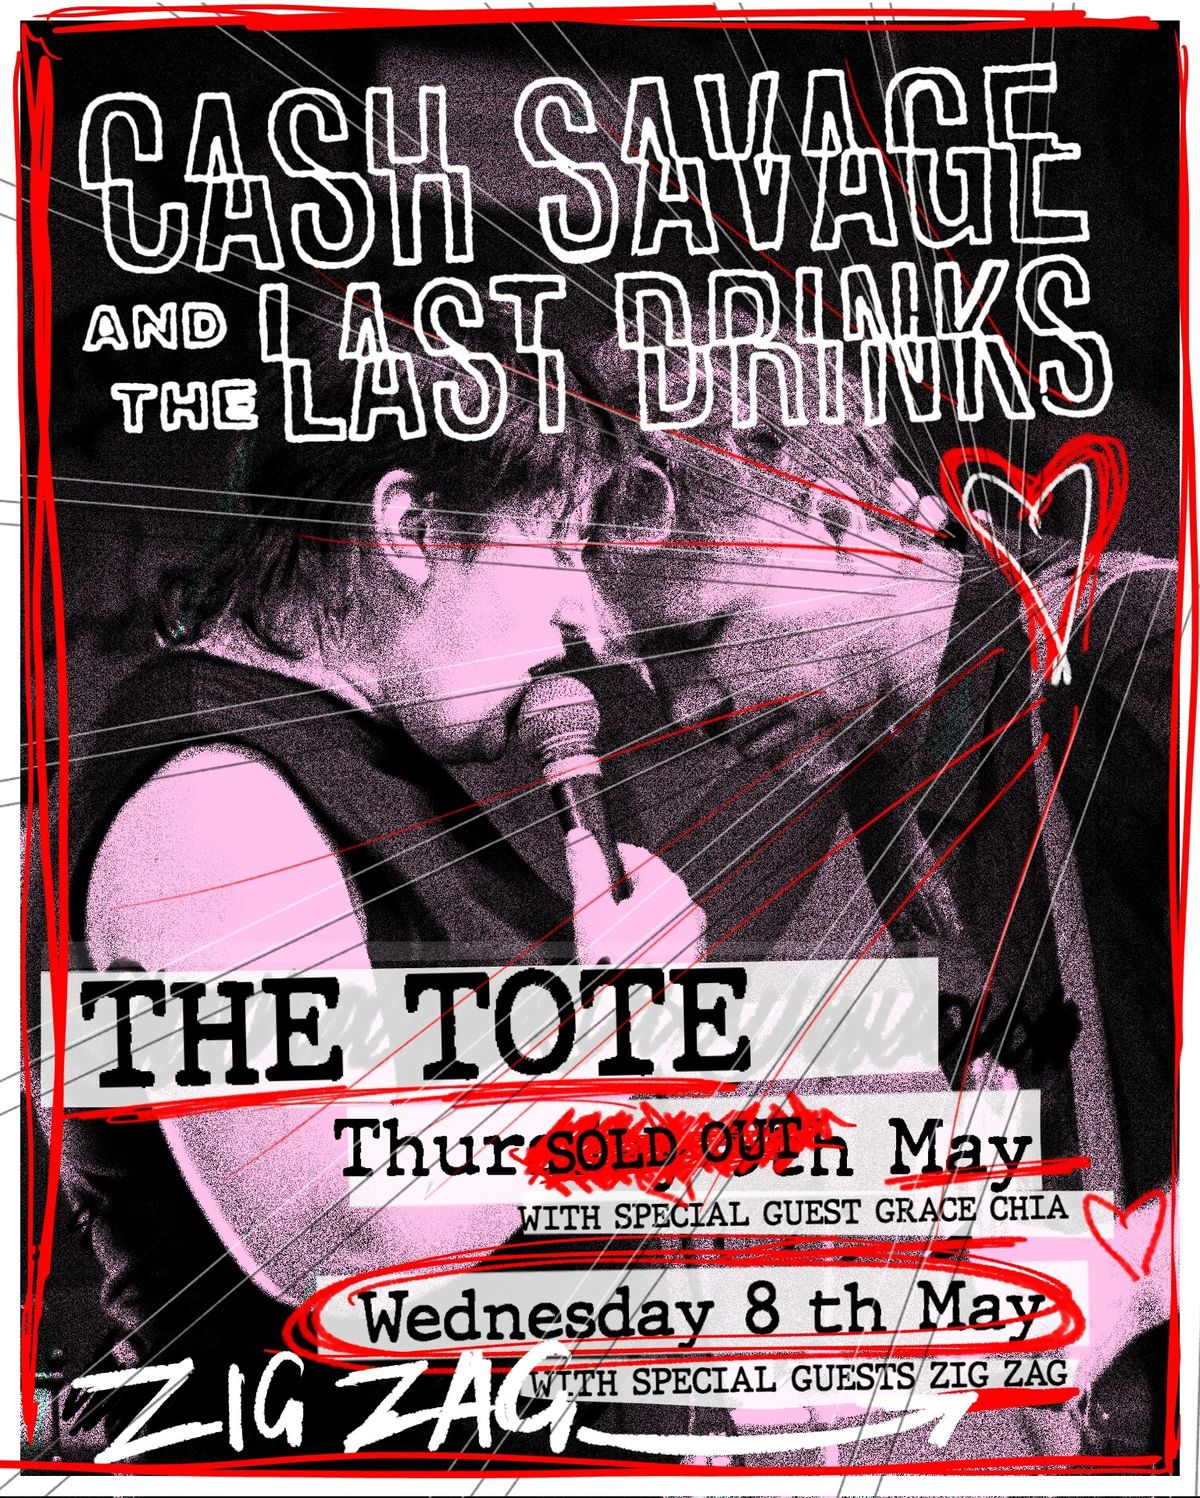 Cash Savage & The Last Drinks @ The Tote